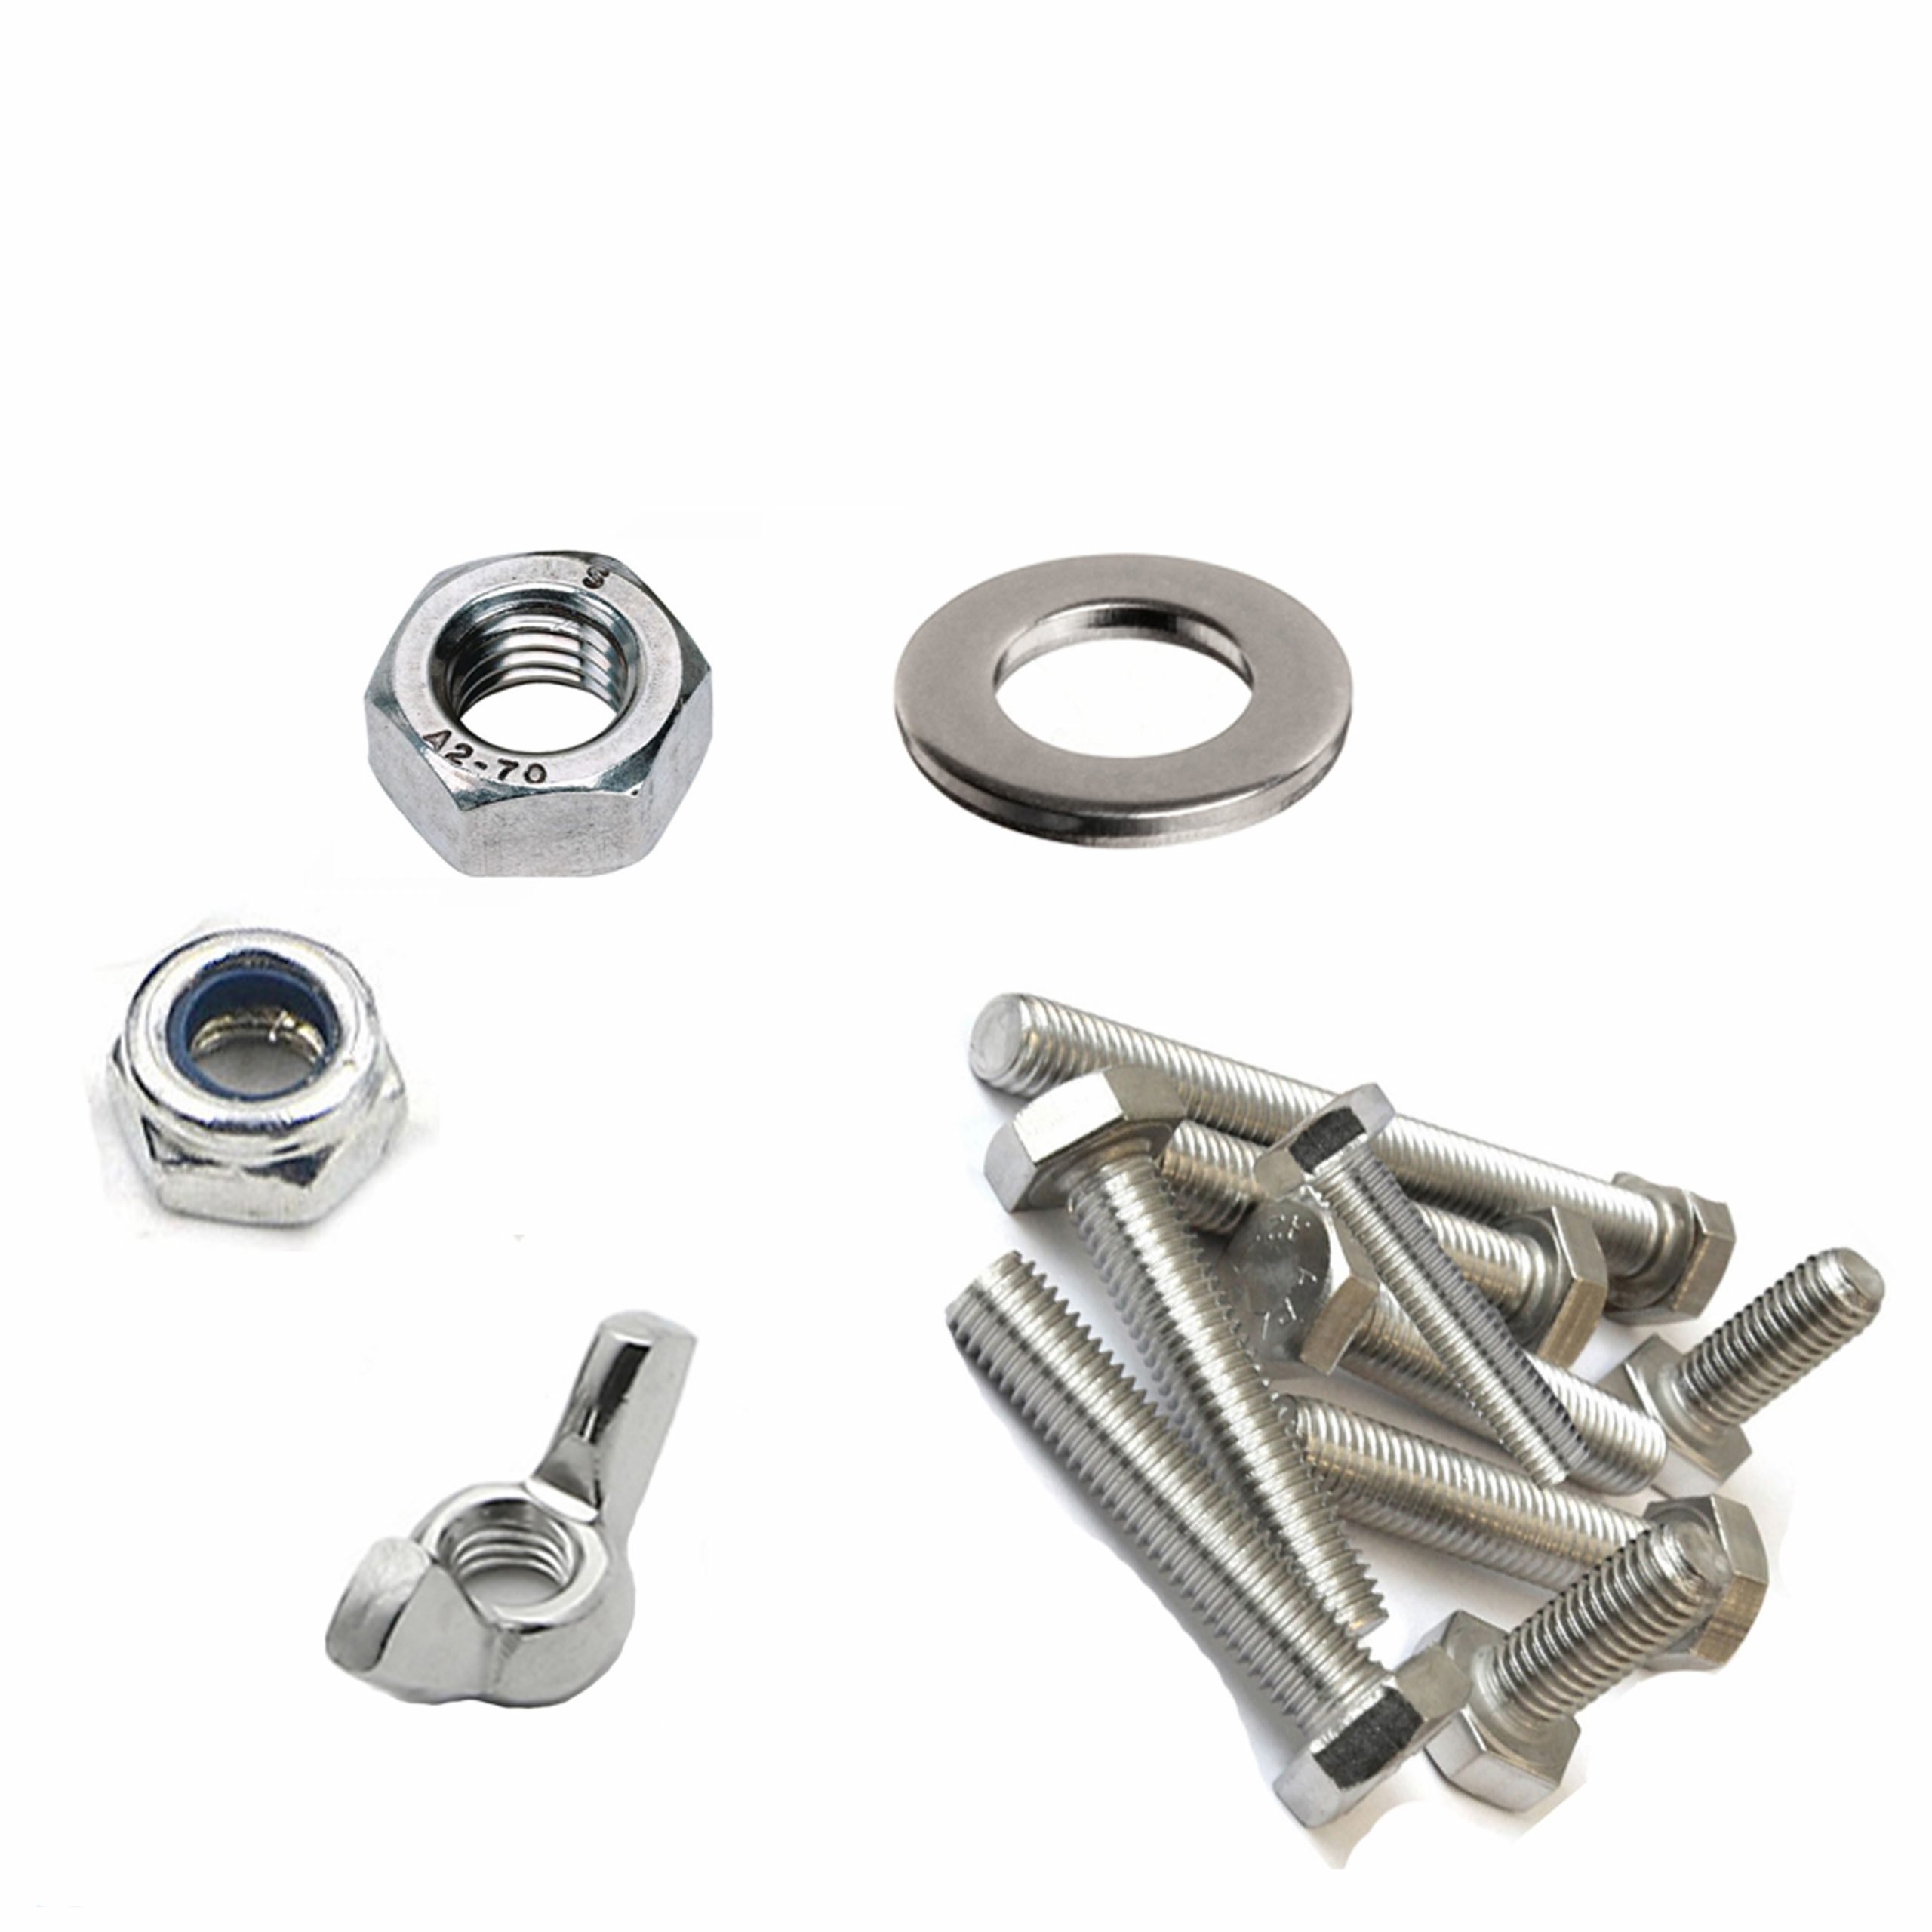 https://universal-hardware.co.uk/wp-content/uploads/2019/05/hex-head-bolt-nuts-washers2-scaled.jpg